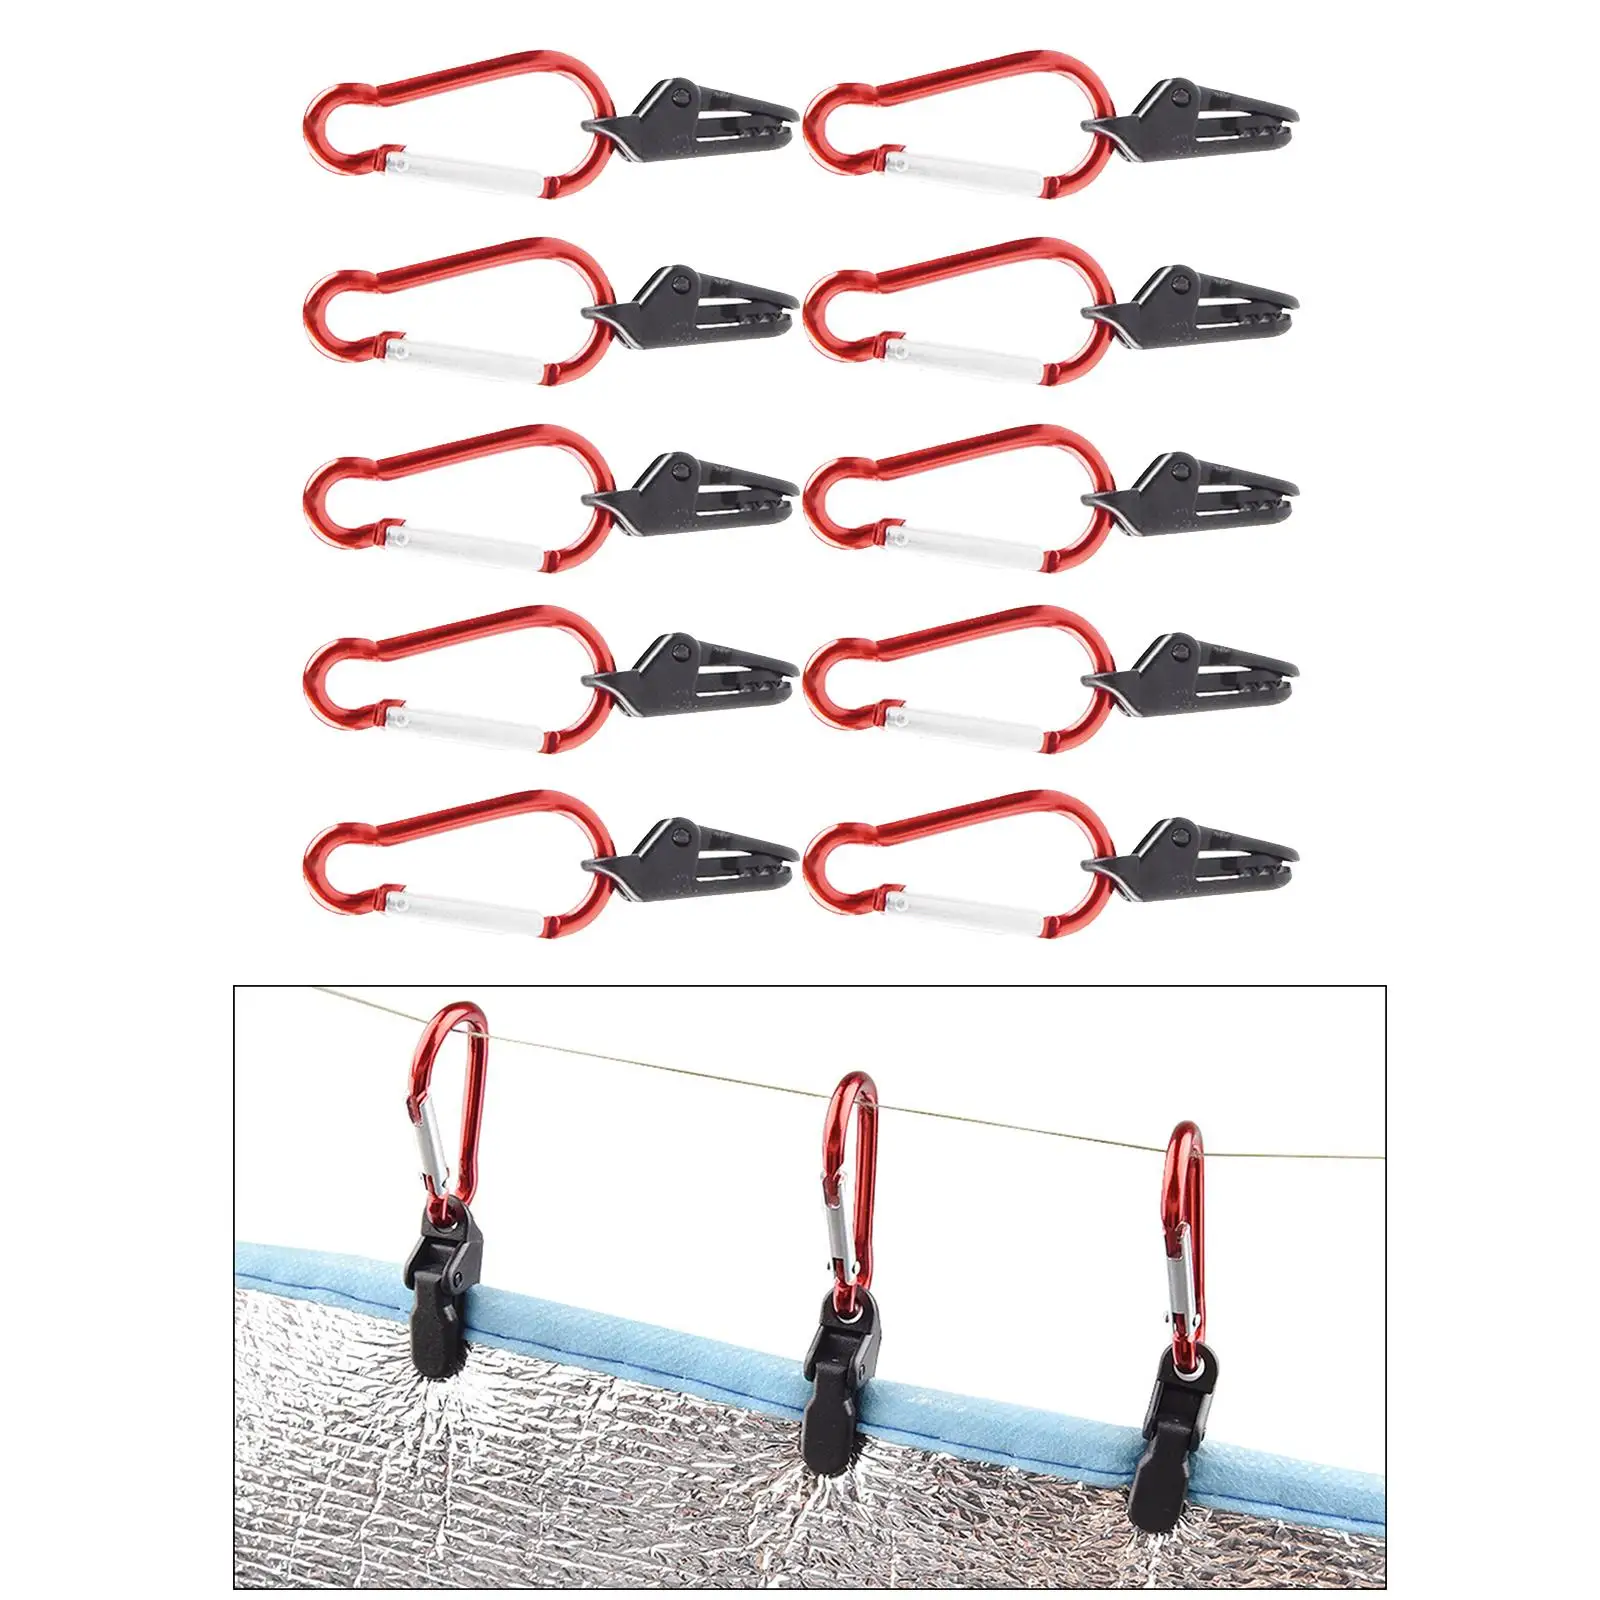 10x Tarp Clips Buckle Tent Clamps Camping Hiking Alligator Mouth Clip Hanger